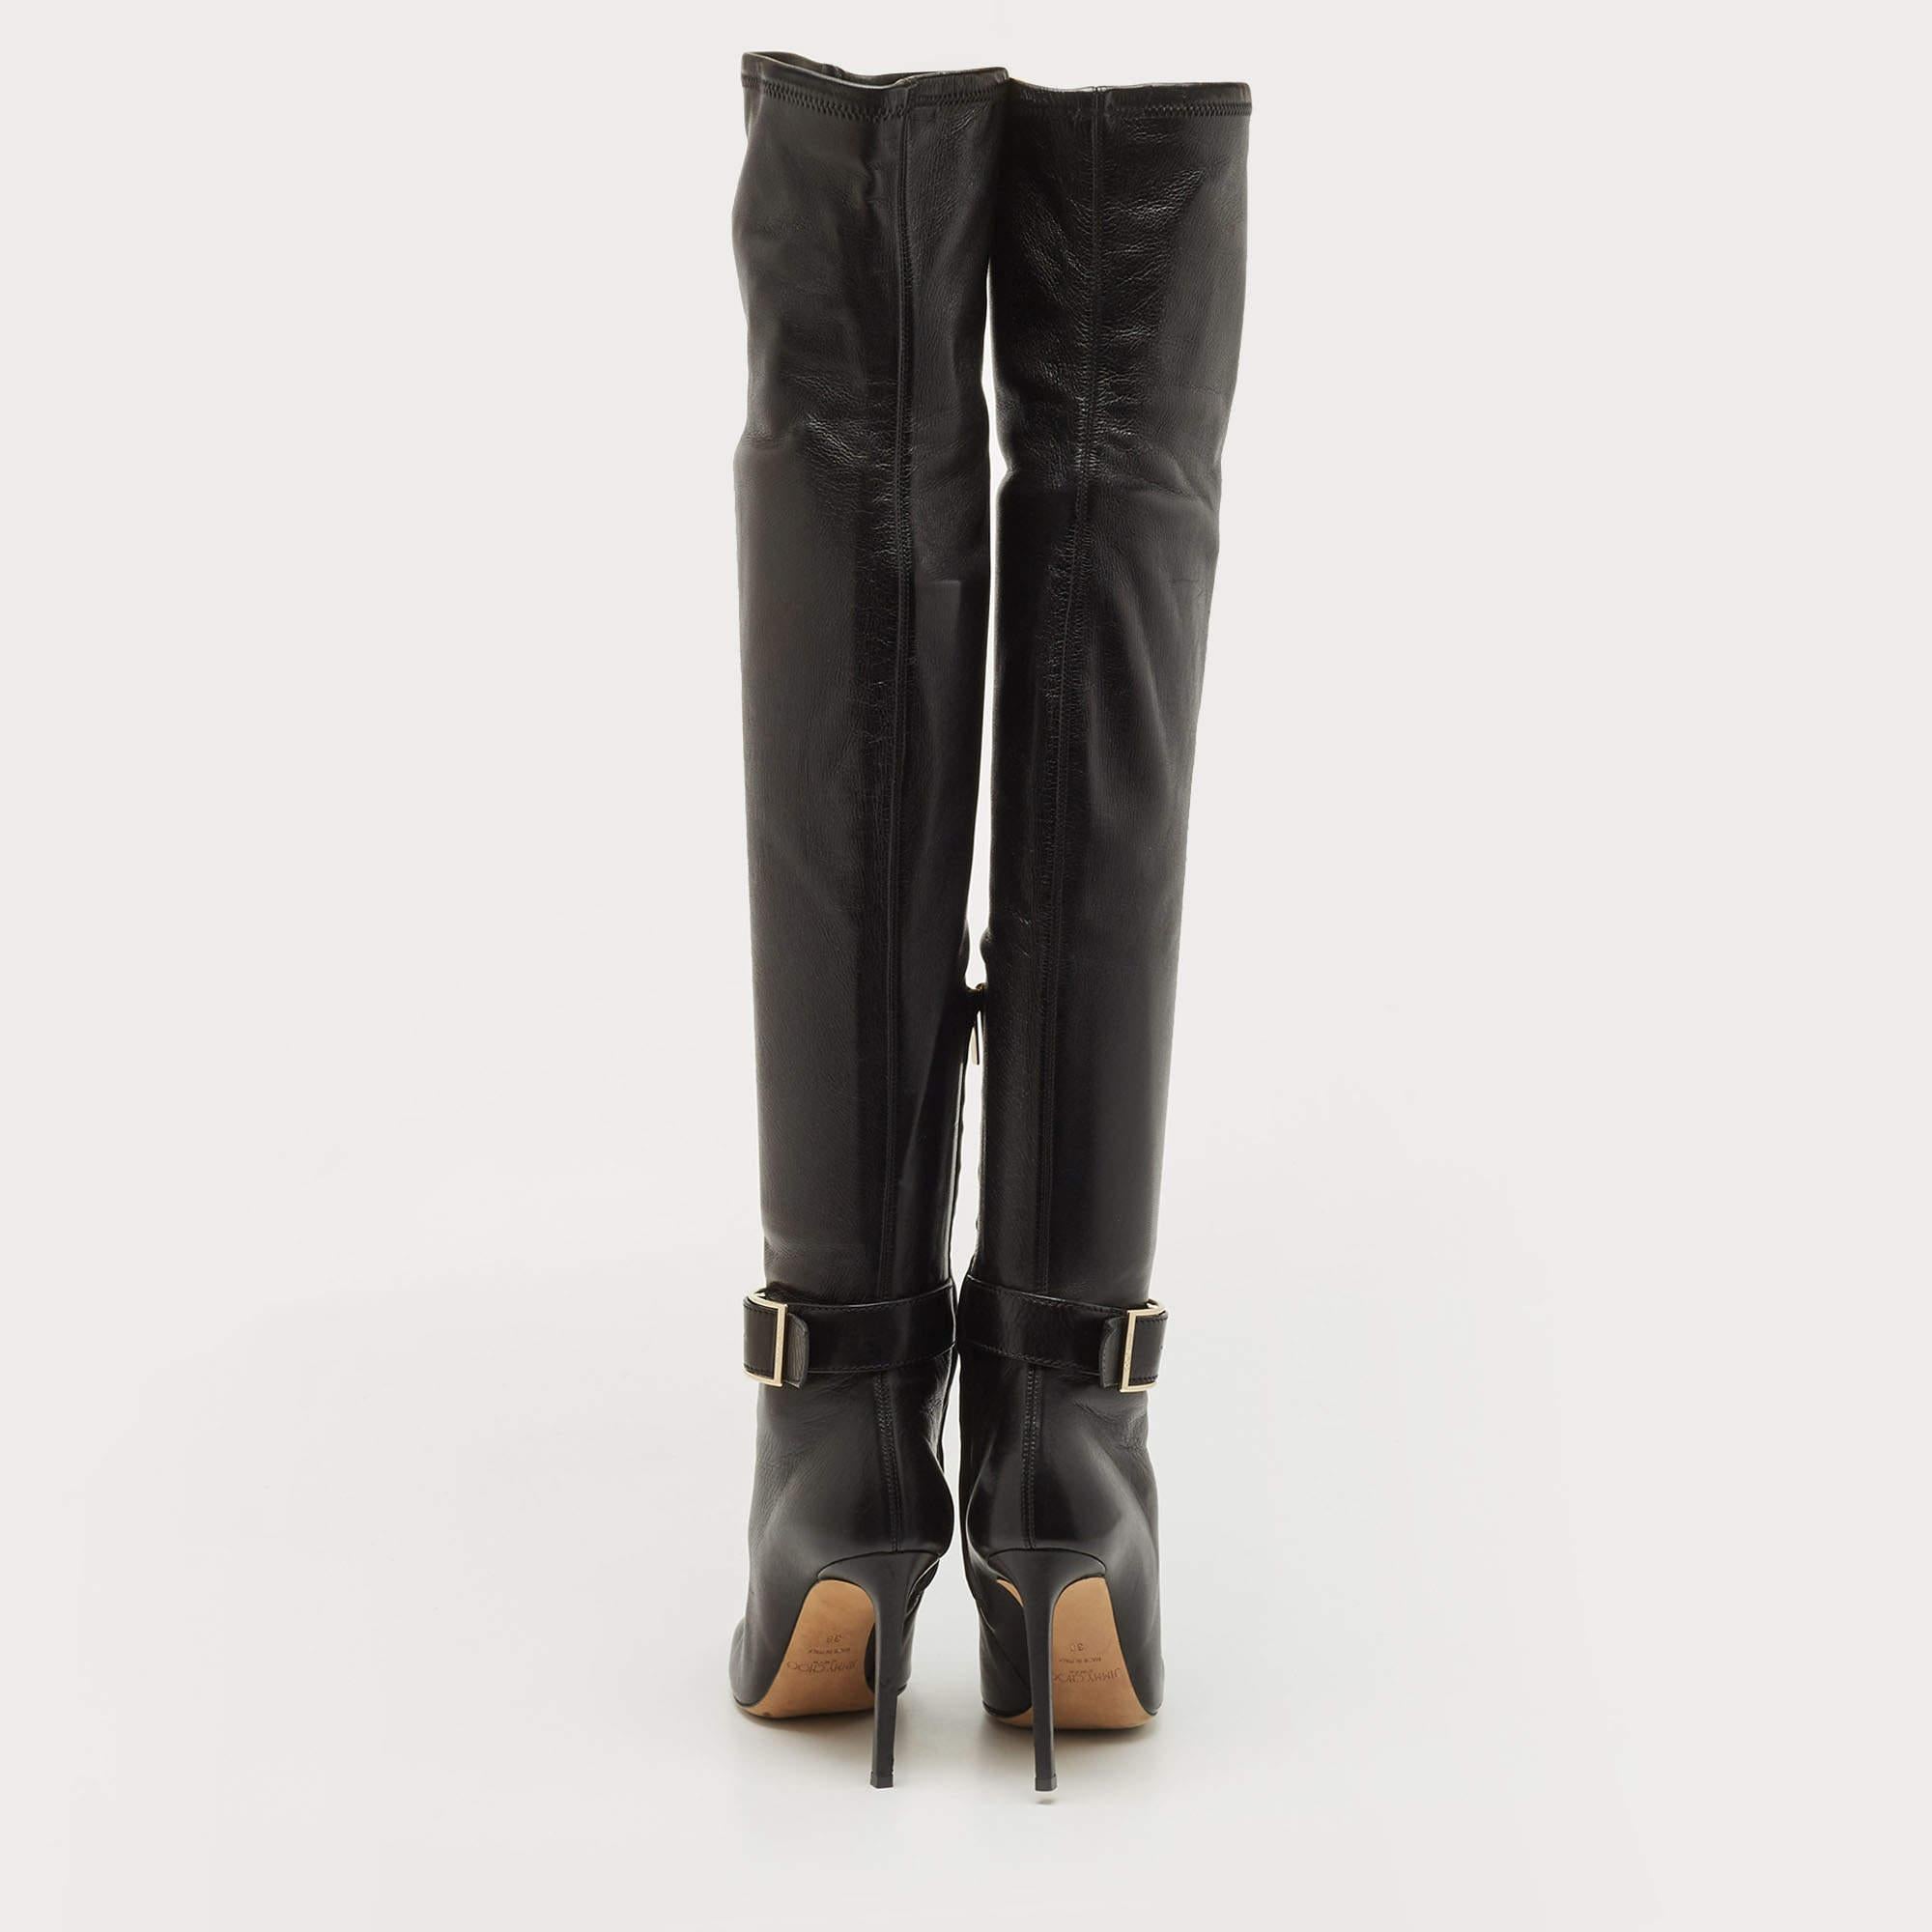 Jimmy Choo Black Leather Knee Length Boots Size 38 1